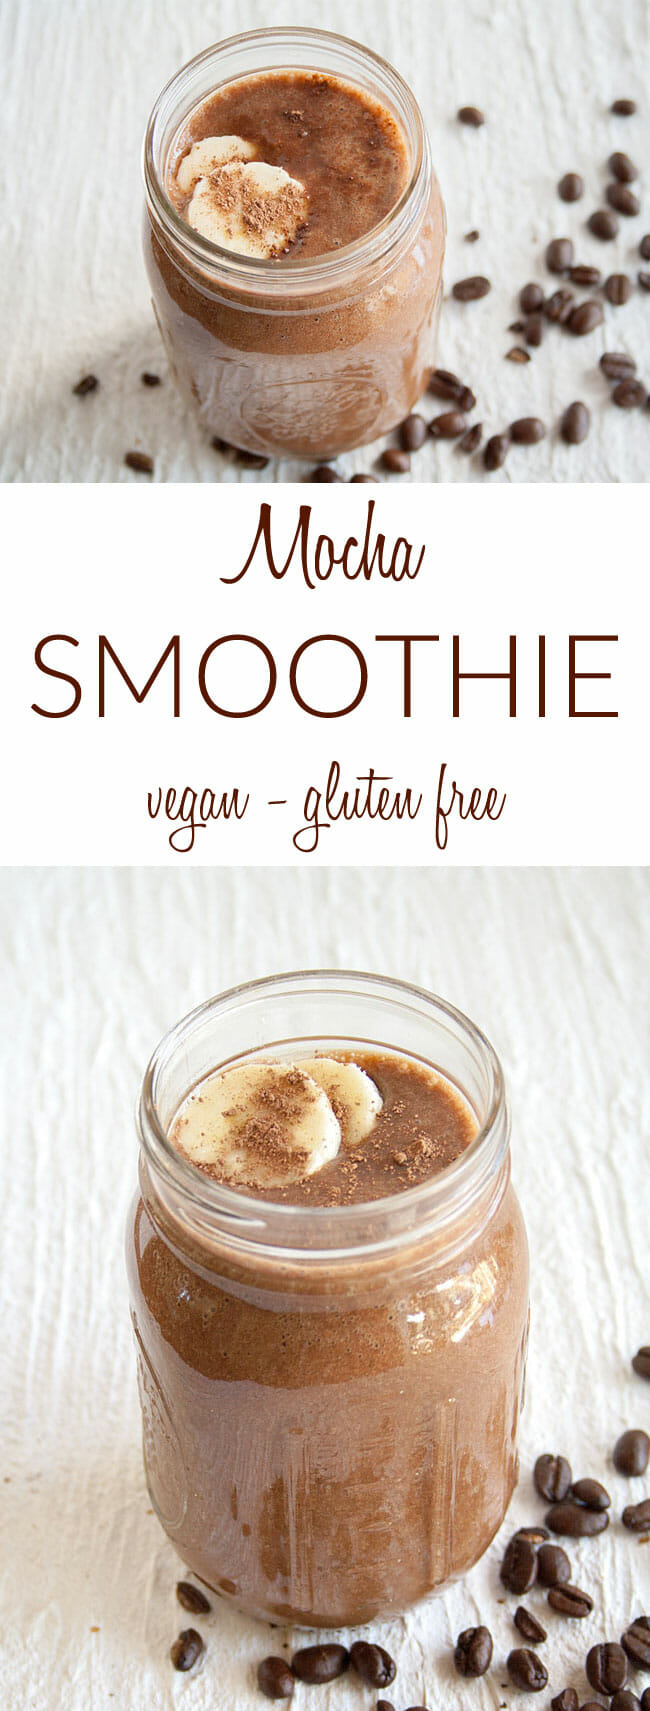 Mocha Smoothie collage photo with text.